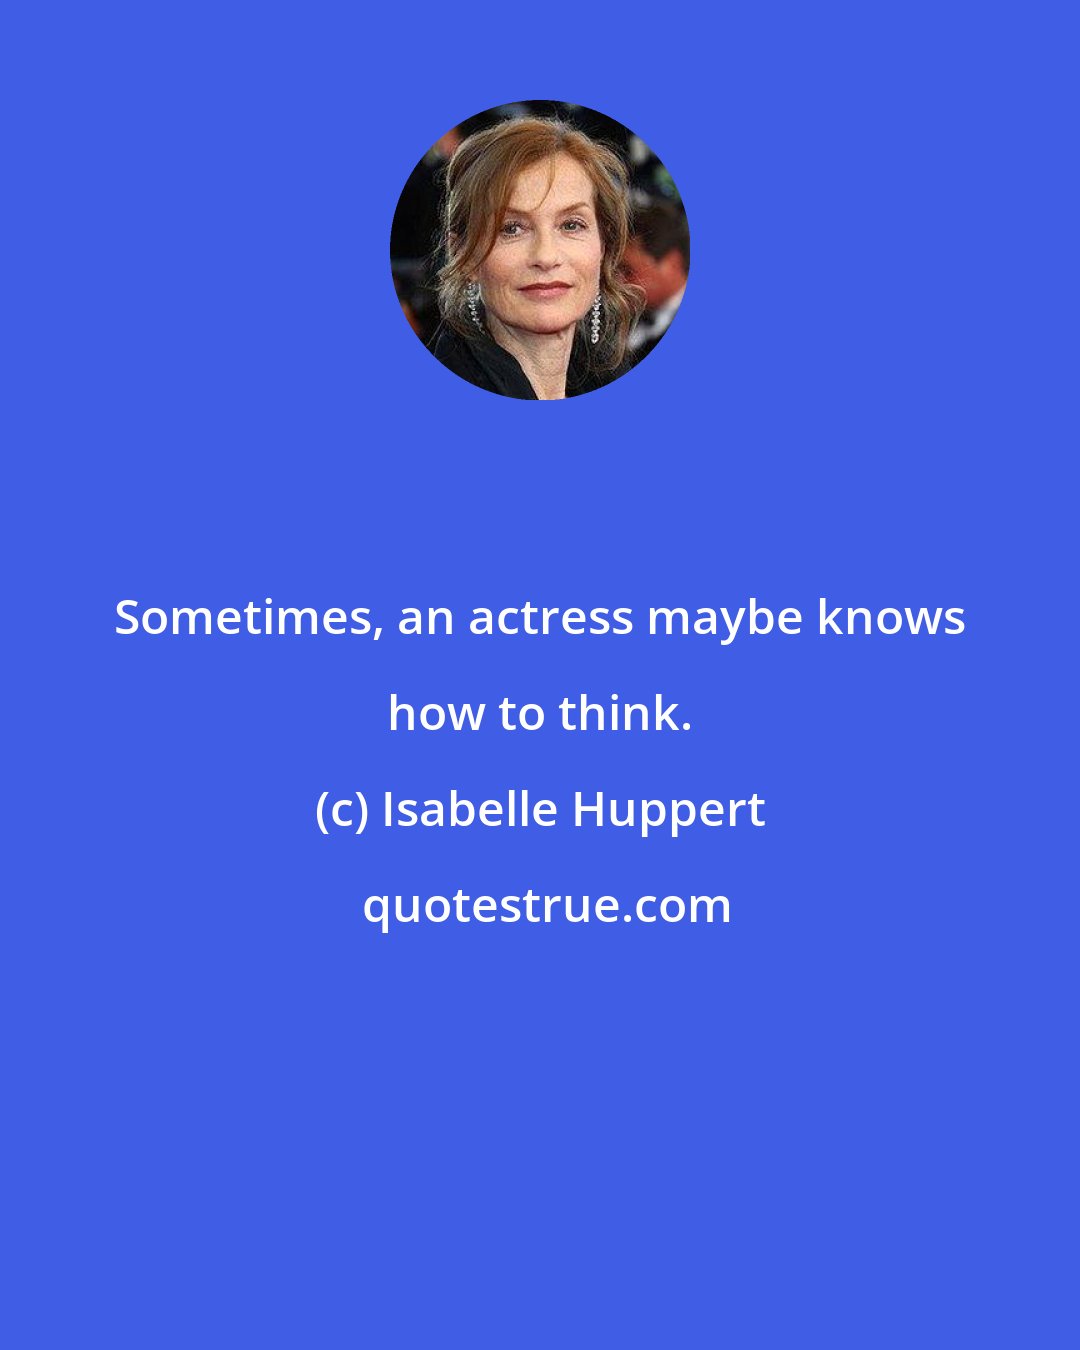 Isabelle Huppert: Sometimes, an actress maybe knows how to think.